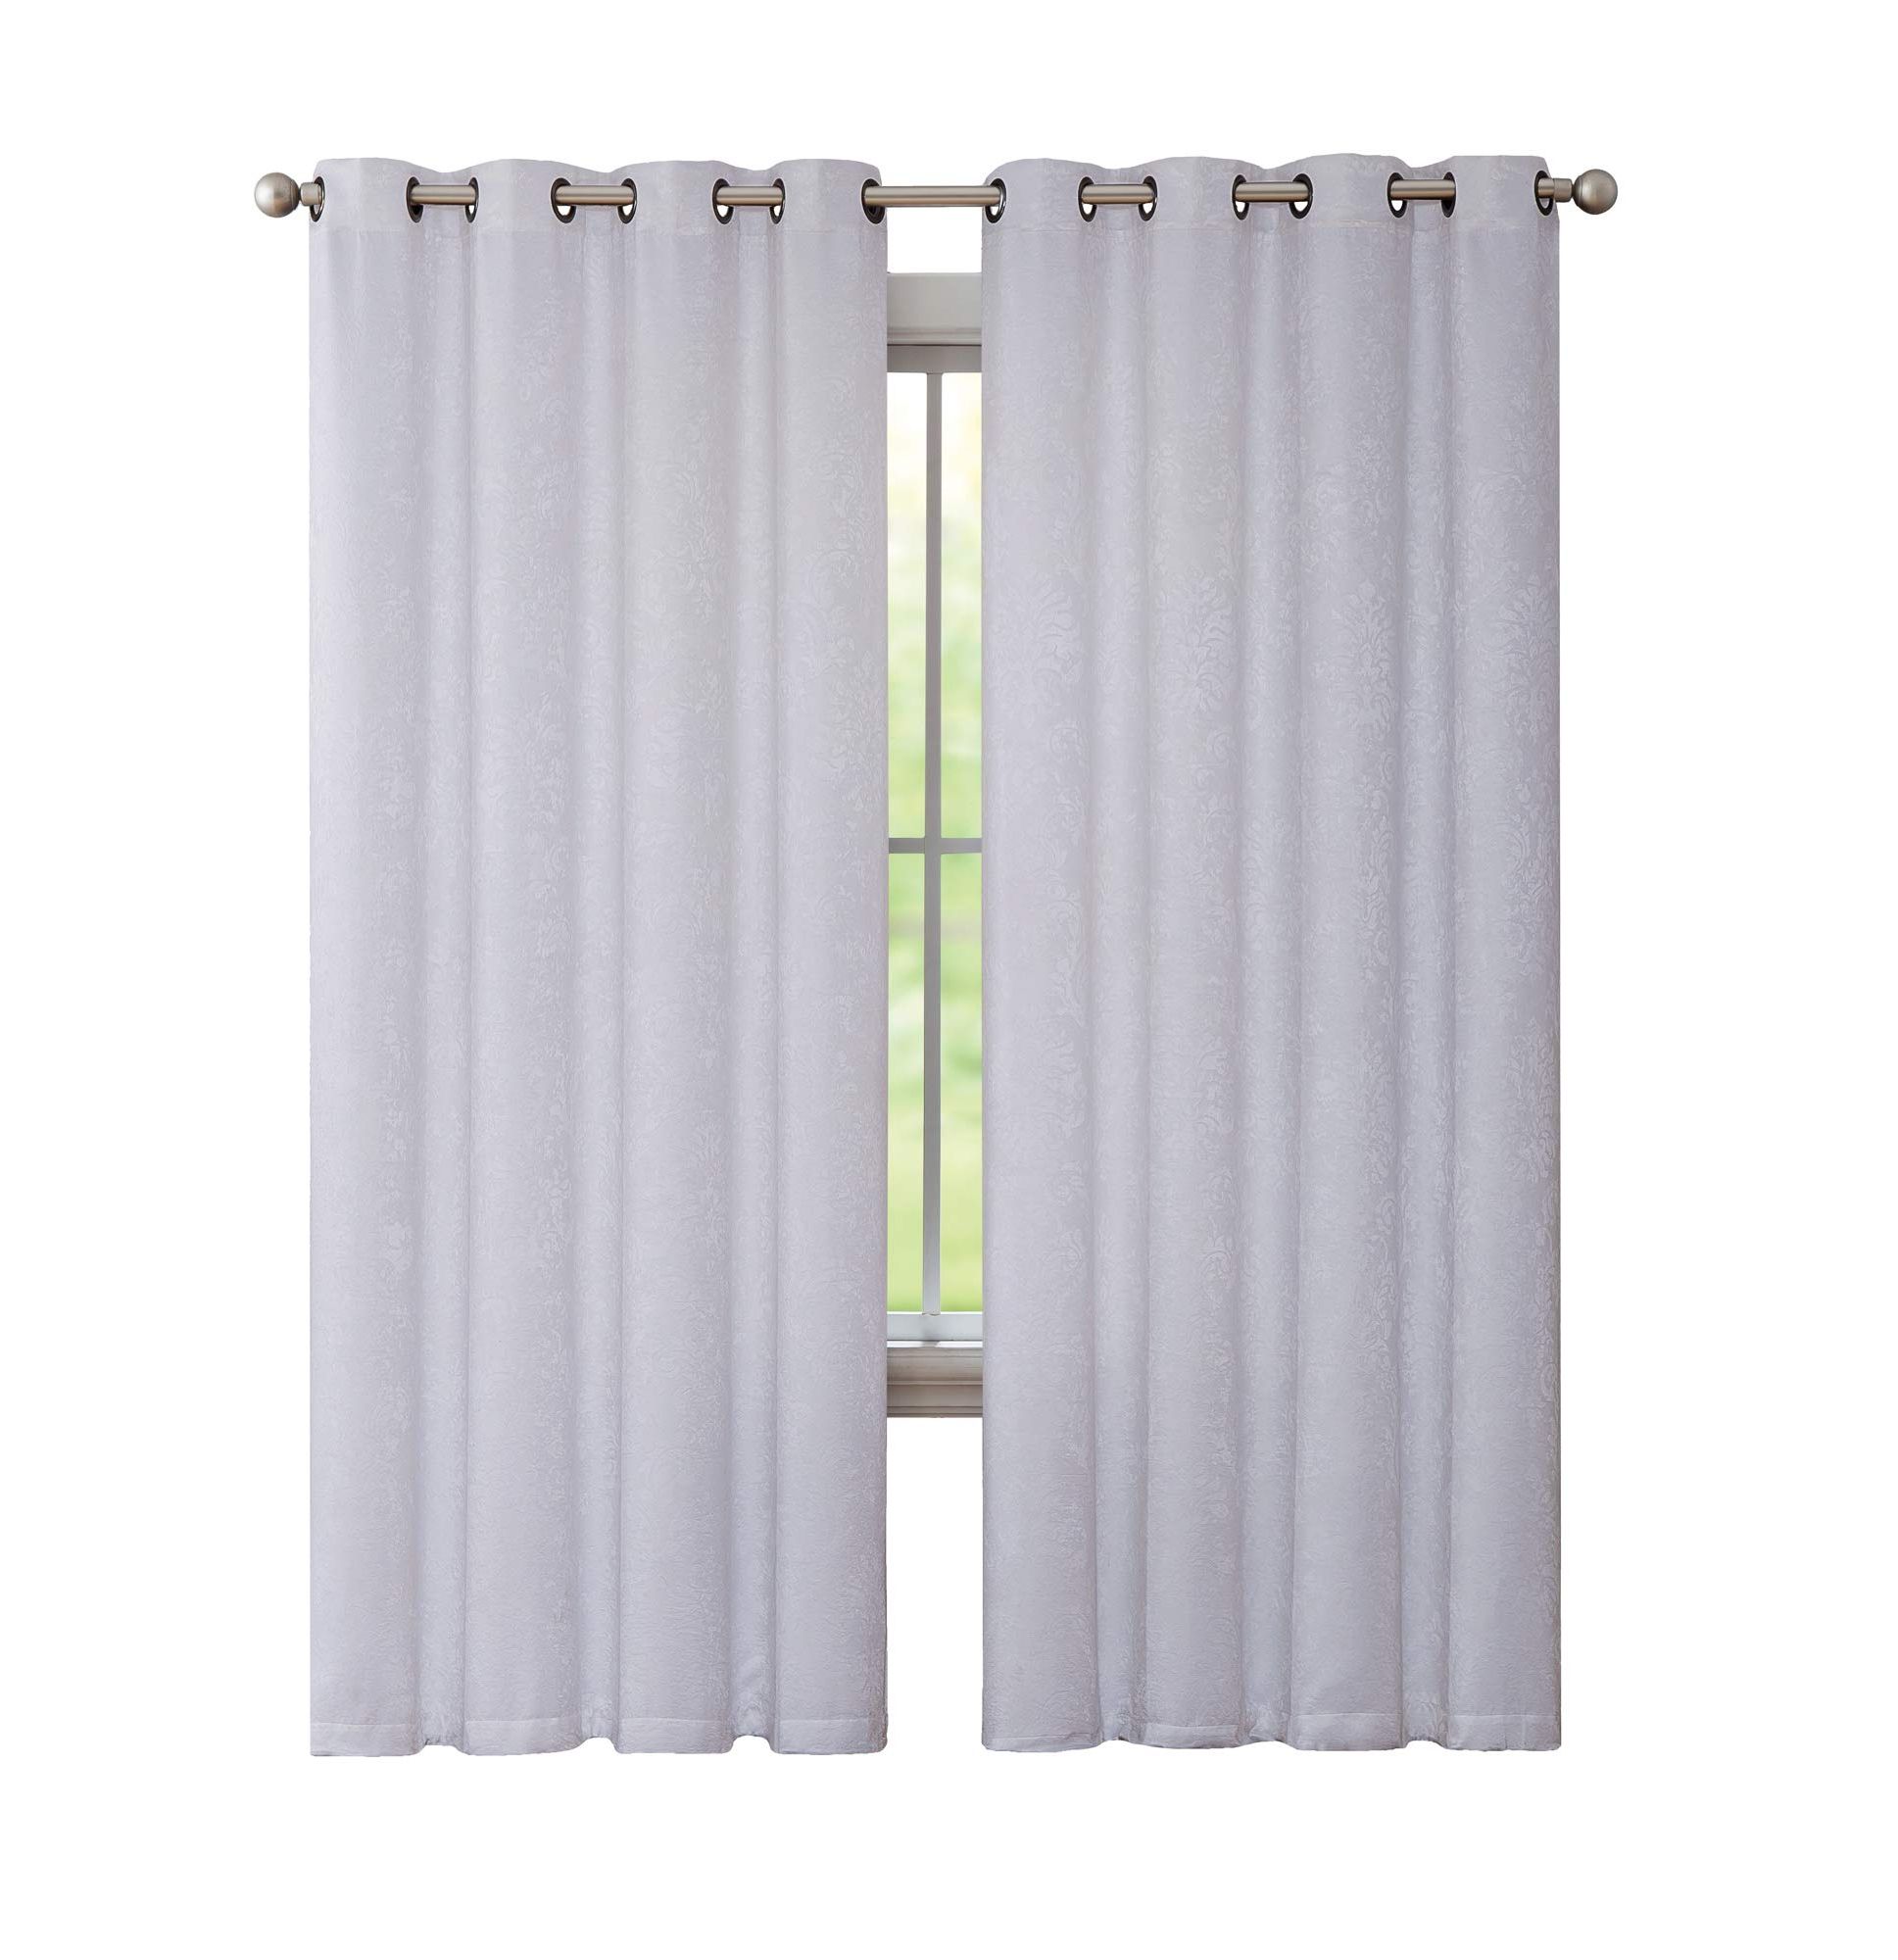 Linenzone Evelyn – Room Darkening Embossed Thermal Weaved Curtain Panel  Noise Reduction Fabric – With 8 Grommets – Premium Draperies (1 Panel 54" W  X With Regard To Most Popular Embossed Thermal Weaved Blackout Grommet Drapery Curtains (View 11 of 20)